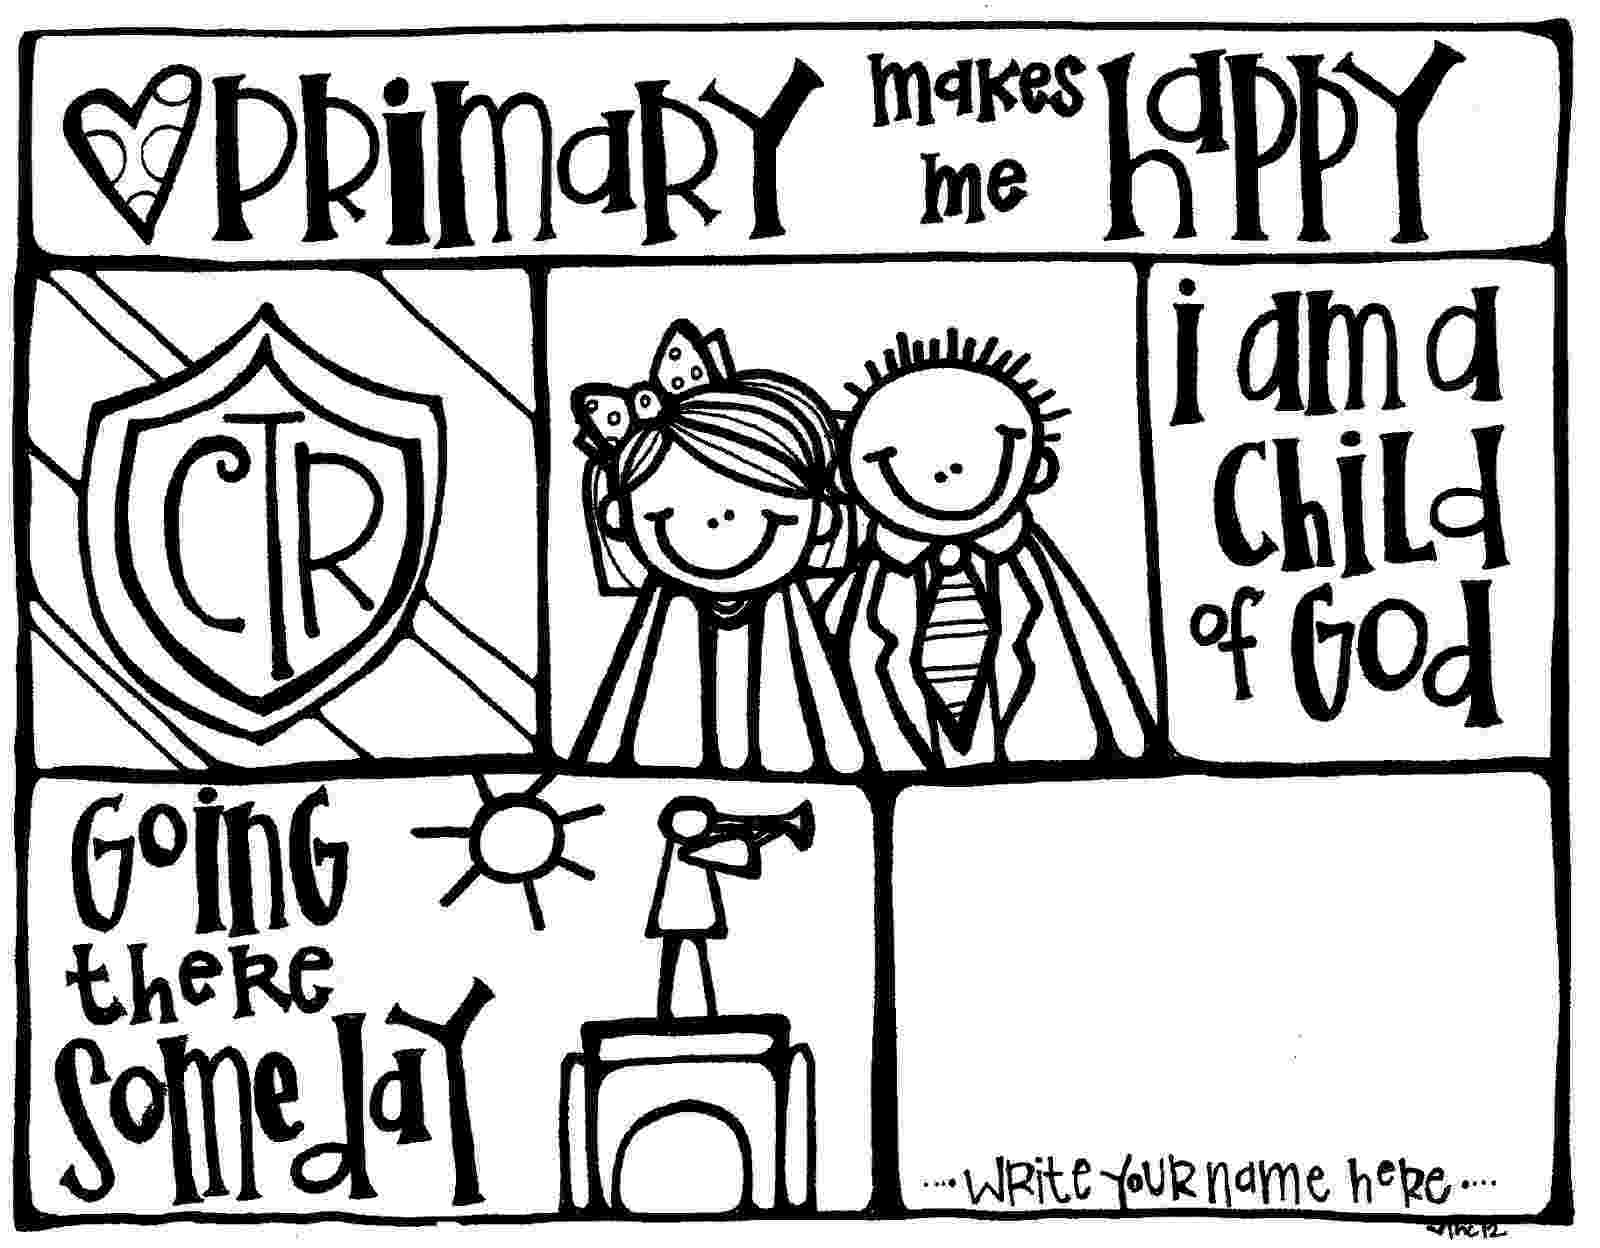 i am a child of god coloring page i am a child of god lds lesson ideas coloring god i of am page child a 